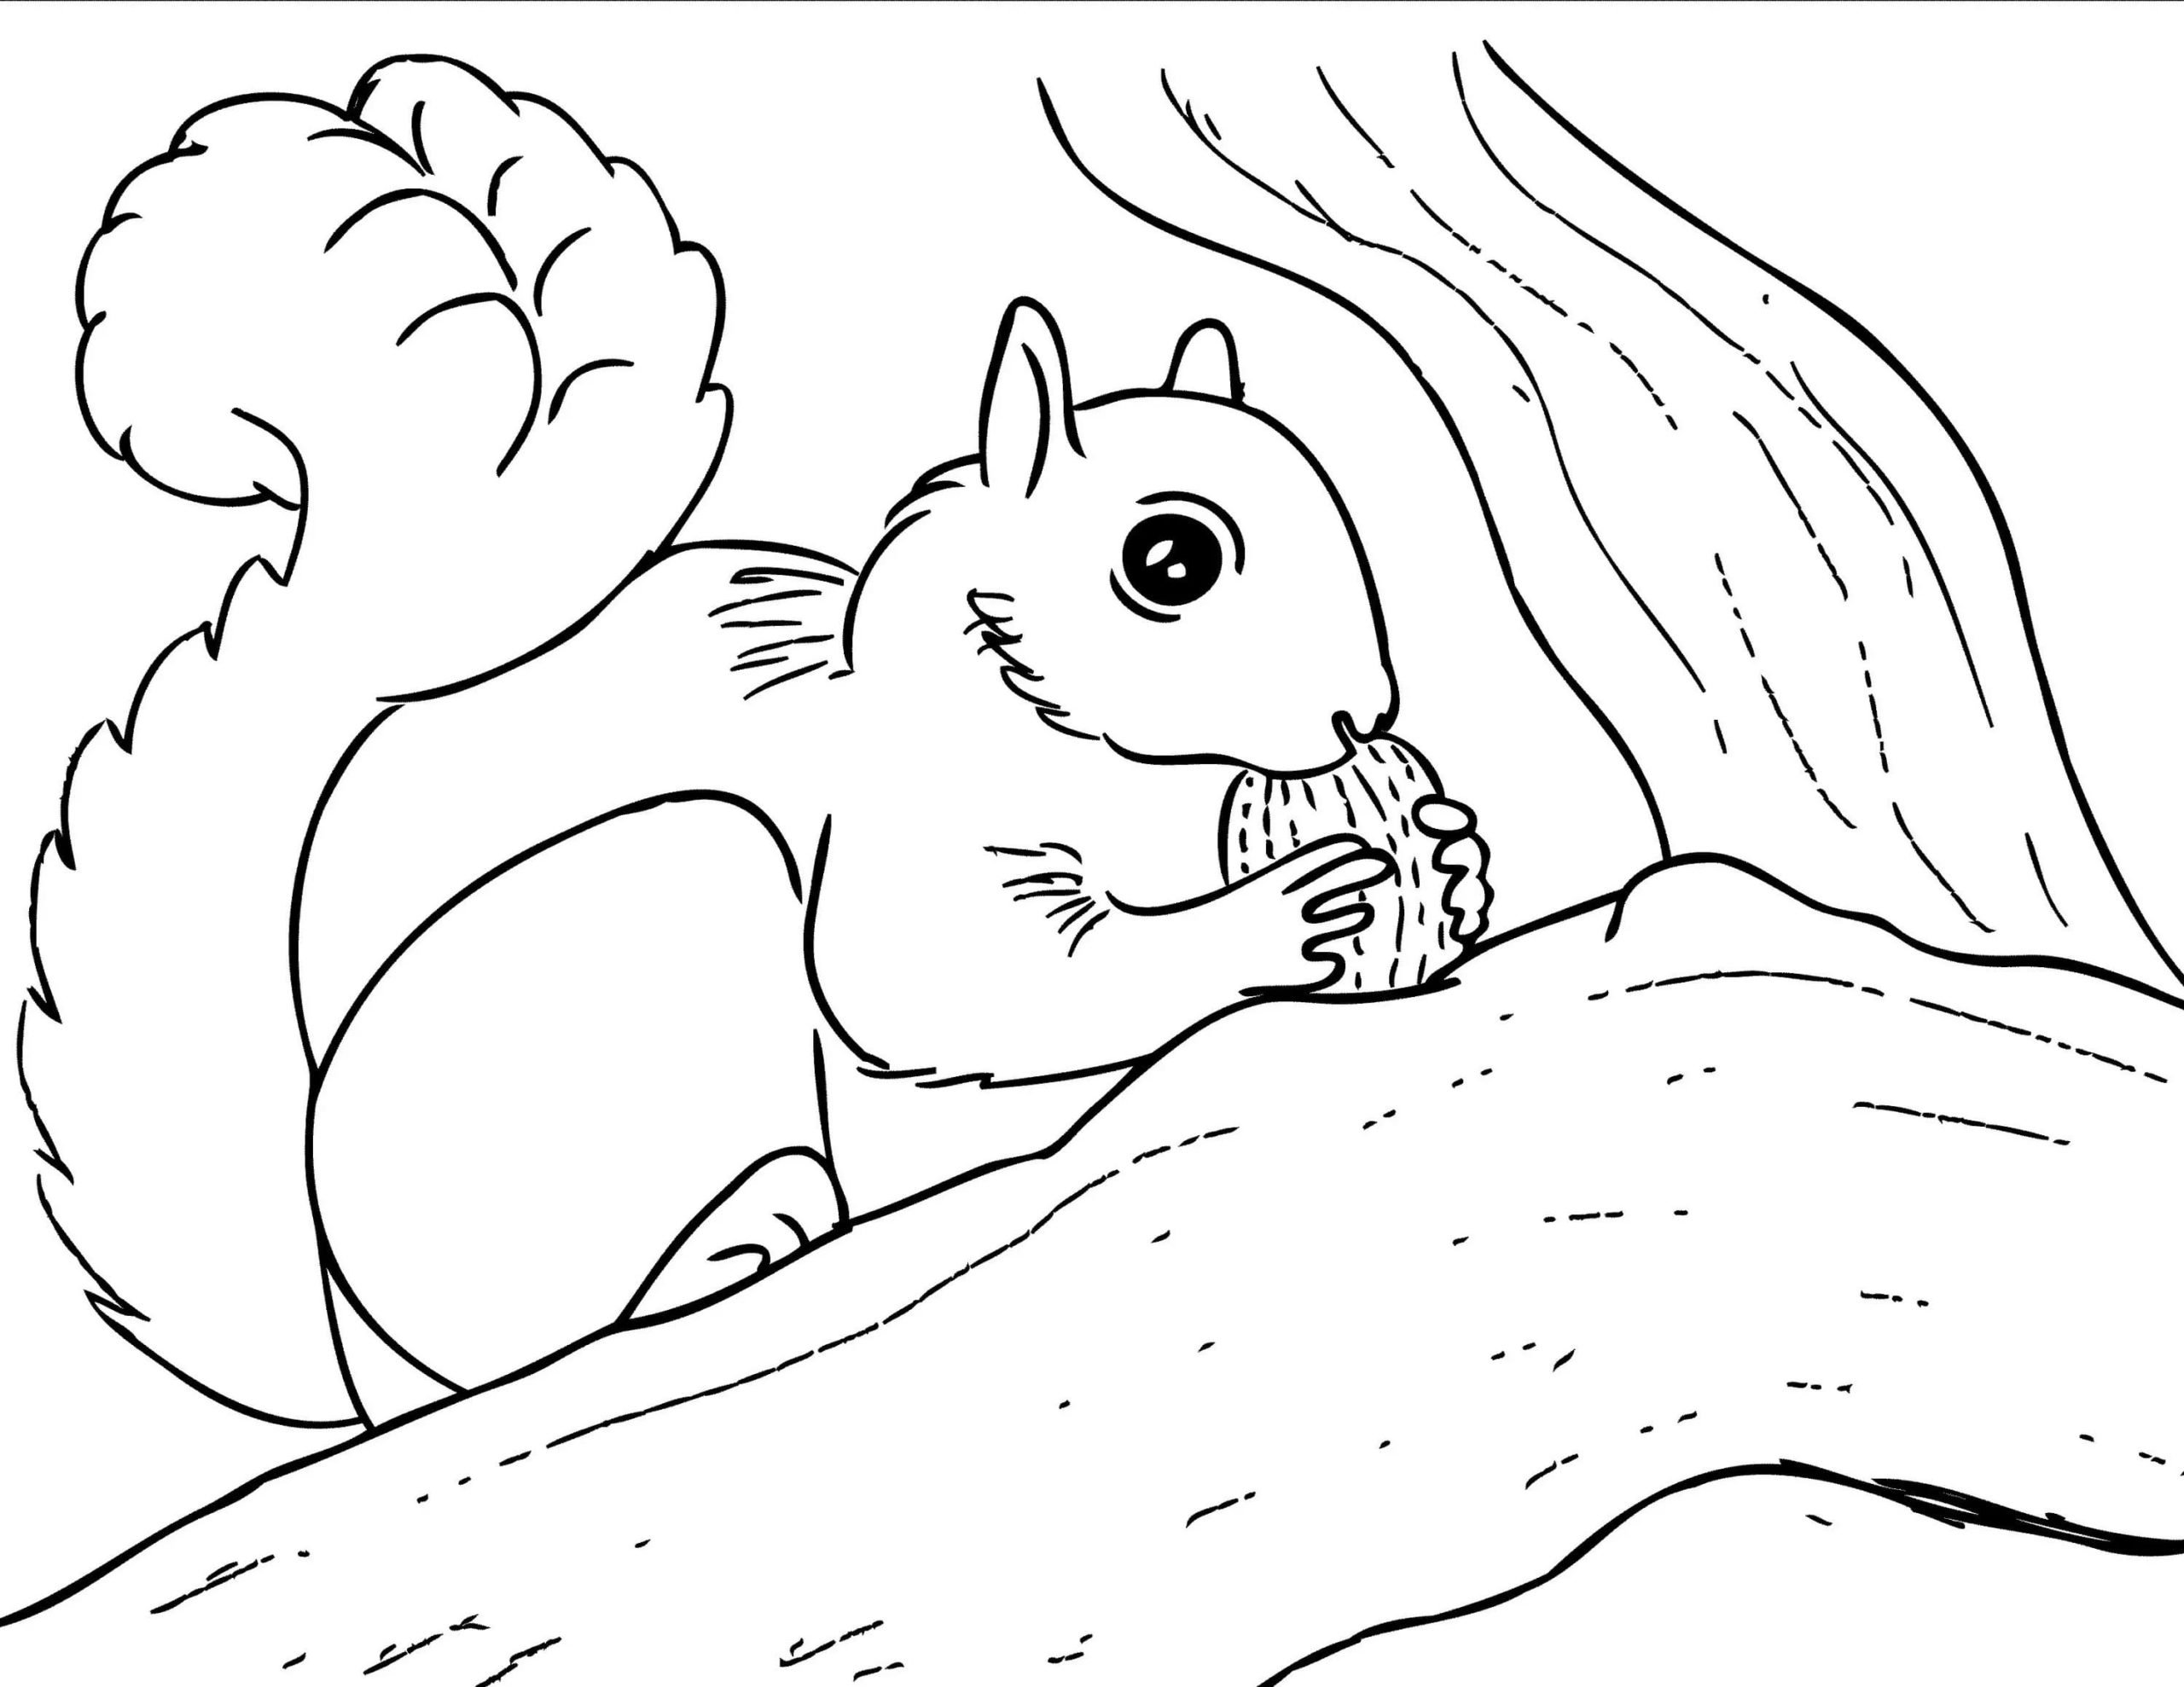 Color-blast squirrel coloring for children 6-7 years old